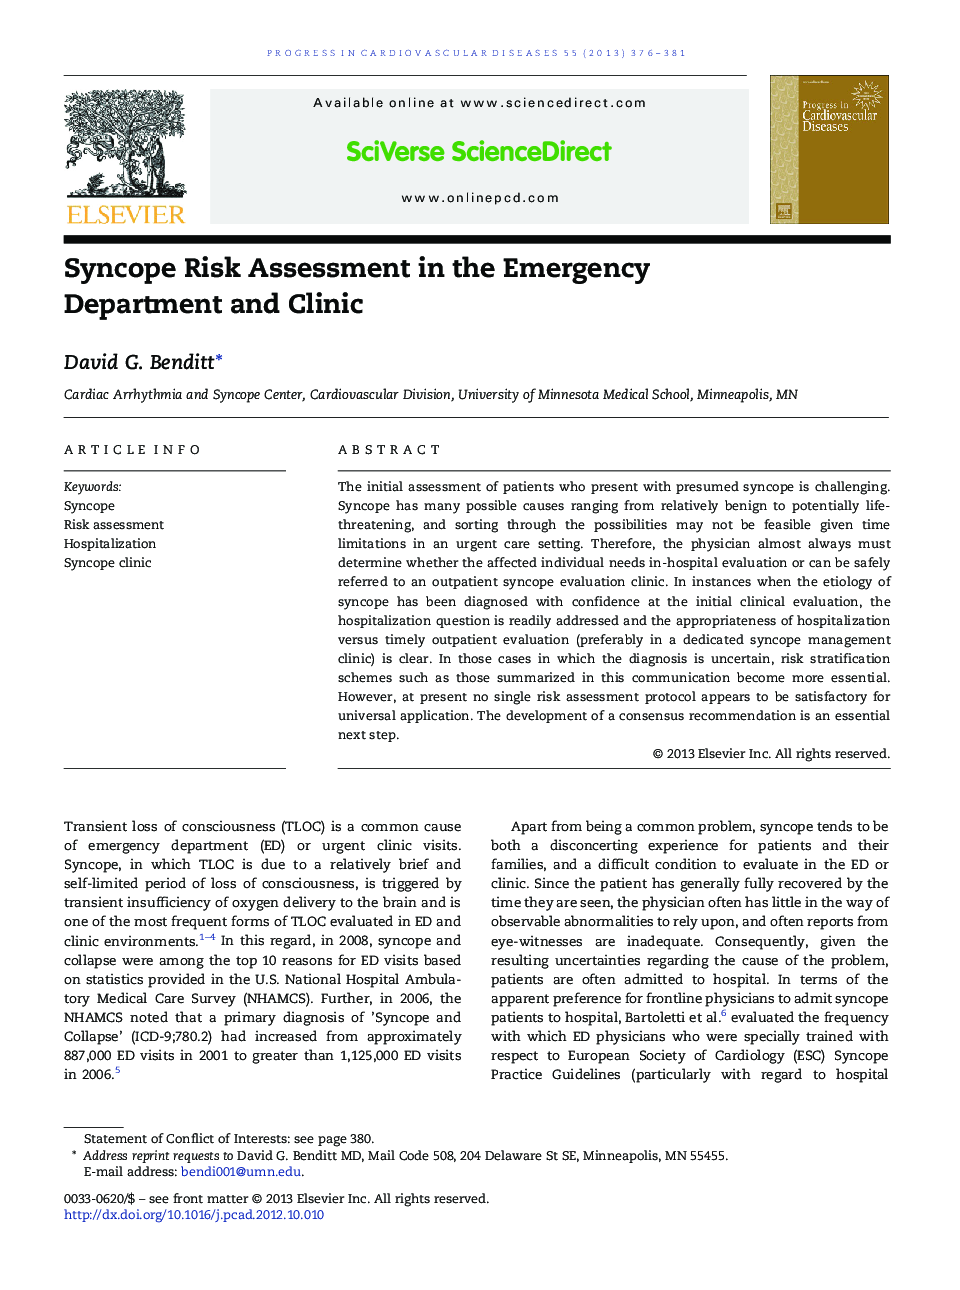 Syncope Risk Assessment in the Emergency Department and Clinic 